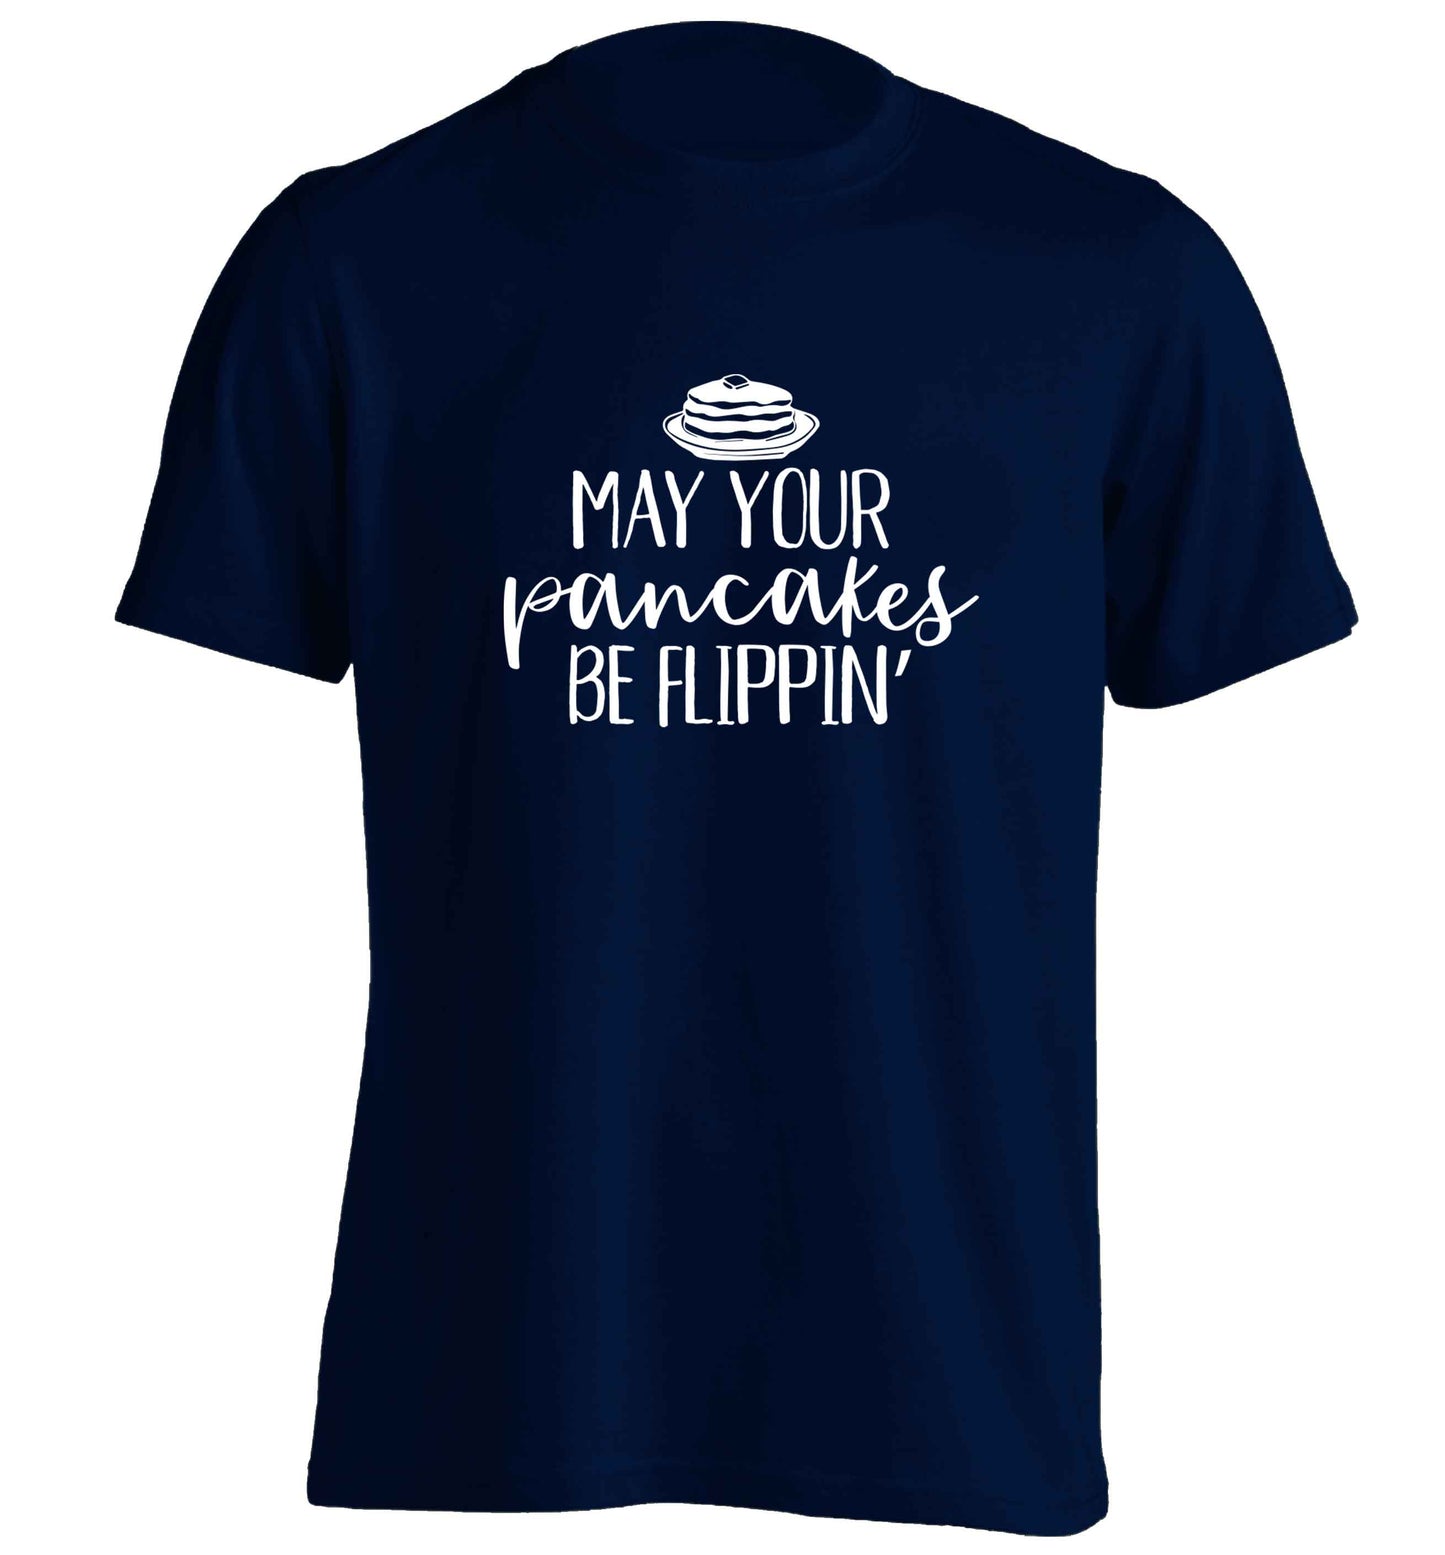 May your pancakes be flippin' adults unisex navy Tshirt 2XL